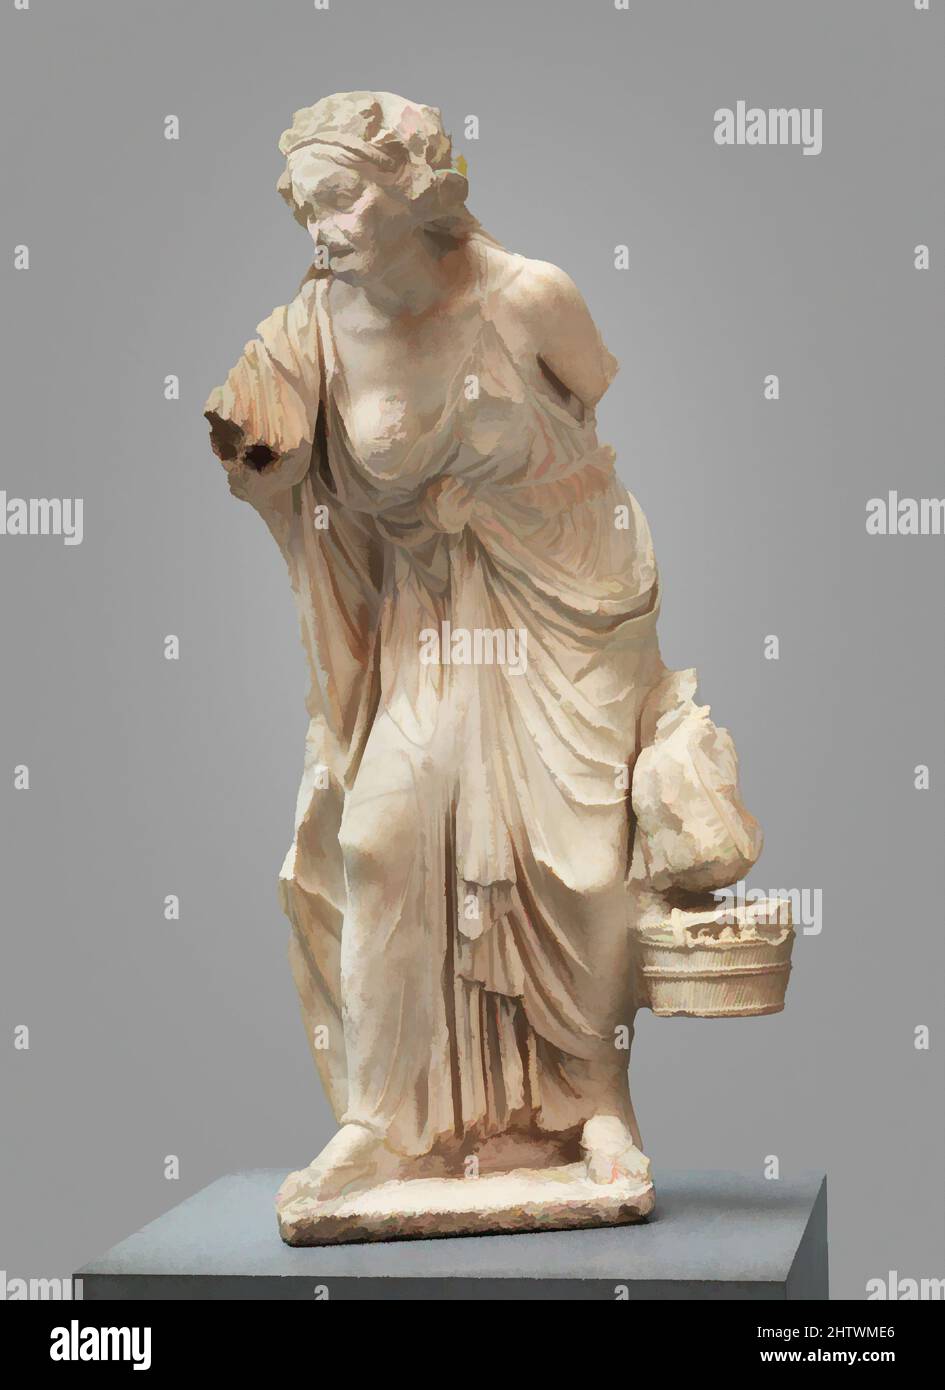 Art inspired by Marble statue of an old woman, Early Imperial, Julio-Claudian, A.D. 14–68, Roman, Marble, Pentelic, H. 49 5/8 in. (125.98 cm), Stone Sculpture, Copy of a Greek work of the second century B.C.. During the Hellenistic period, artists became concerned with the accurate, Classic works modernized by Artotop with a splash of modernity. Shapes, color and value, eye-catching visual impact on art. Emotions through freedom of artworks in a contemporary way. A timeless message pursuing a wildly creative new direction. Artists turning to the digital medium and creating the Artotop NFT Stock Photo